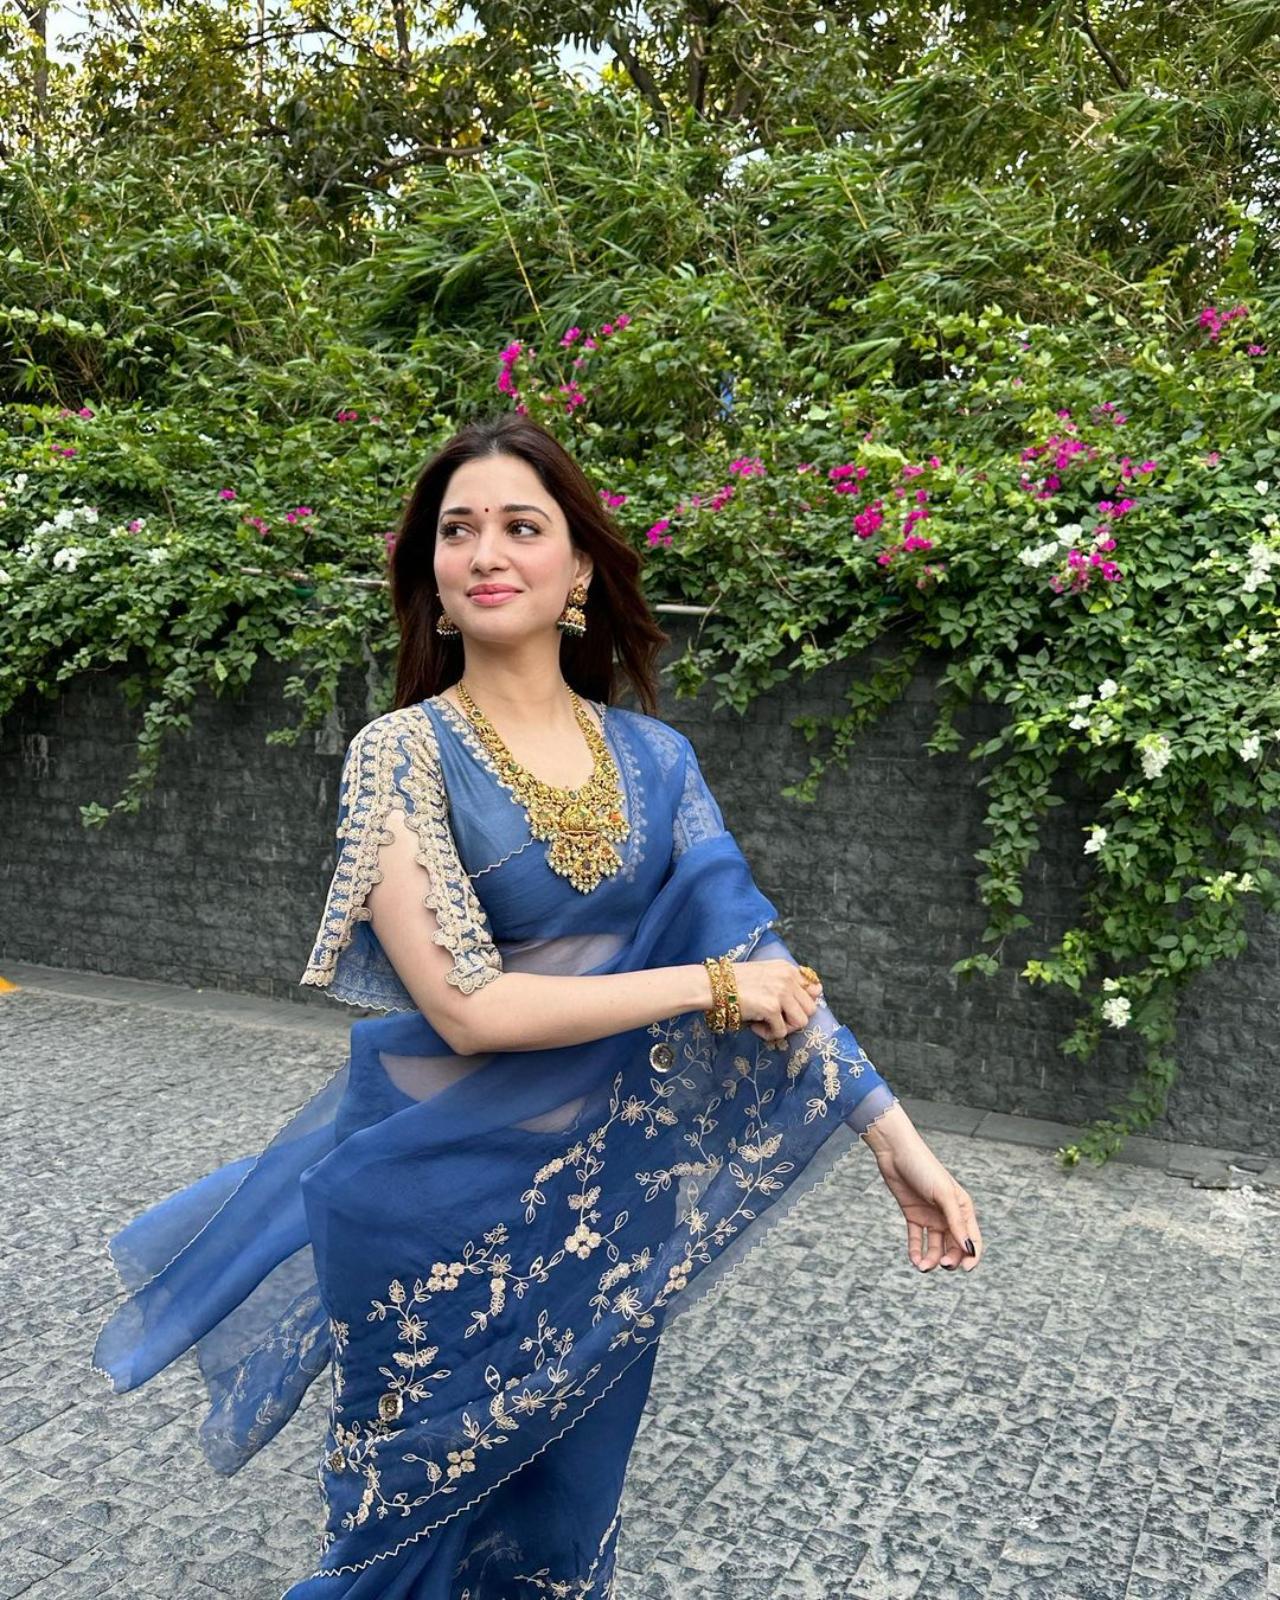 Tamannaah Bhatia shows how to keep it light and stylish with this sheer saree with silver embroidery. The actress paired the outfit with heavy gold jewellery